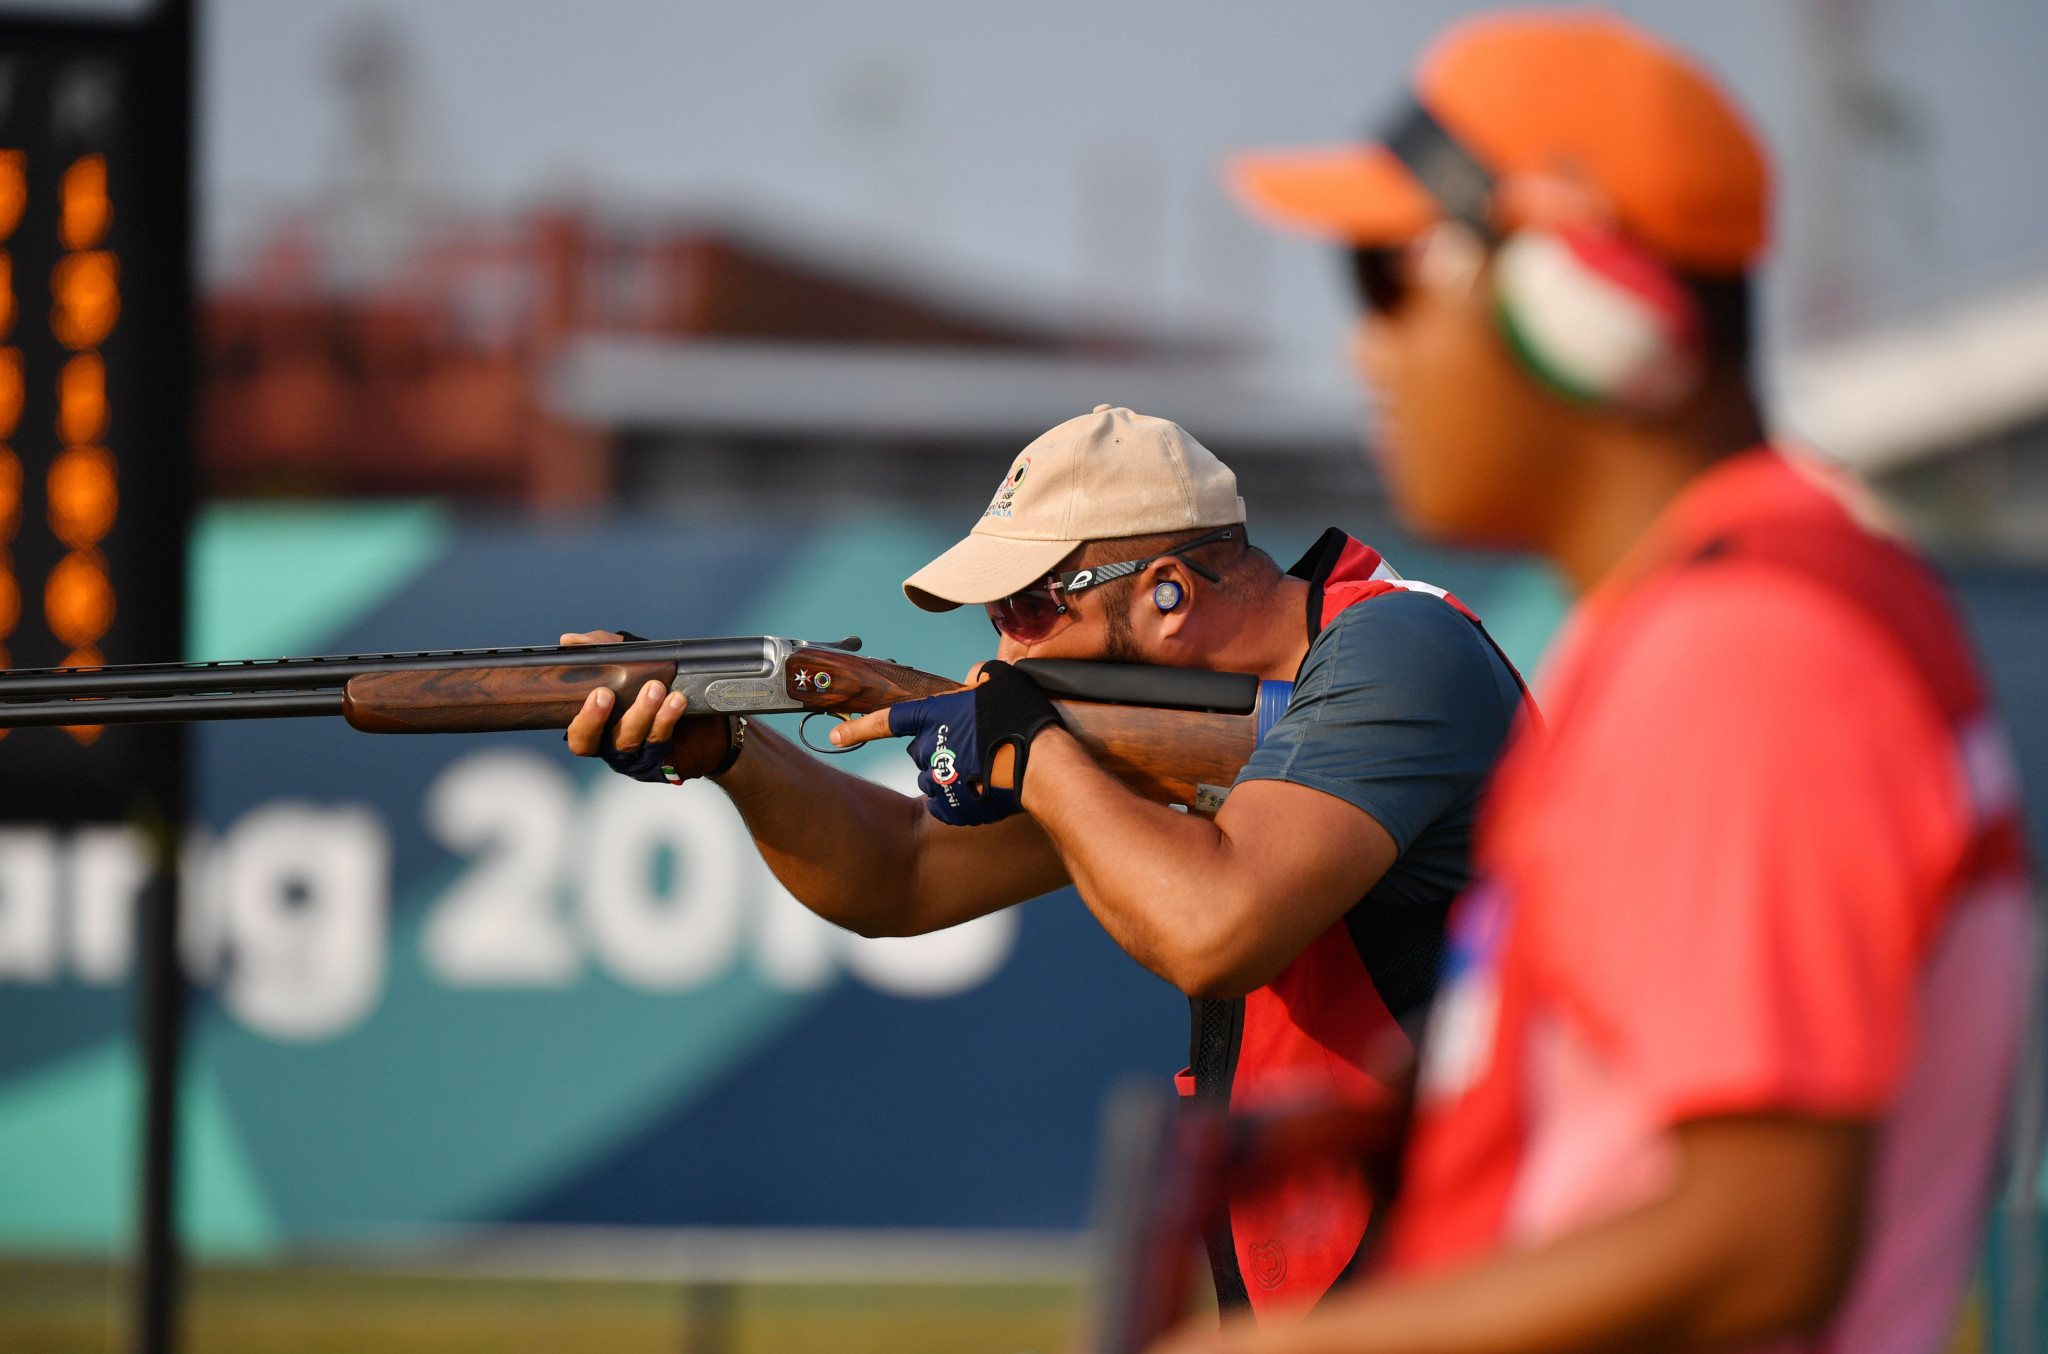 A new event format for mixed team competitions will be trialled at the ISSF Rifle and Pistol World Cup in Beijing ©Getty Images